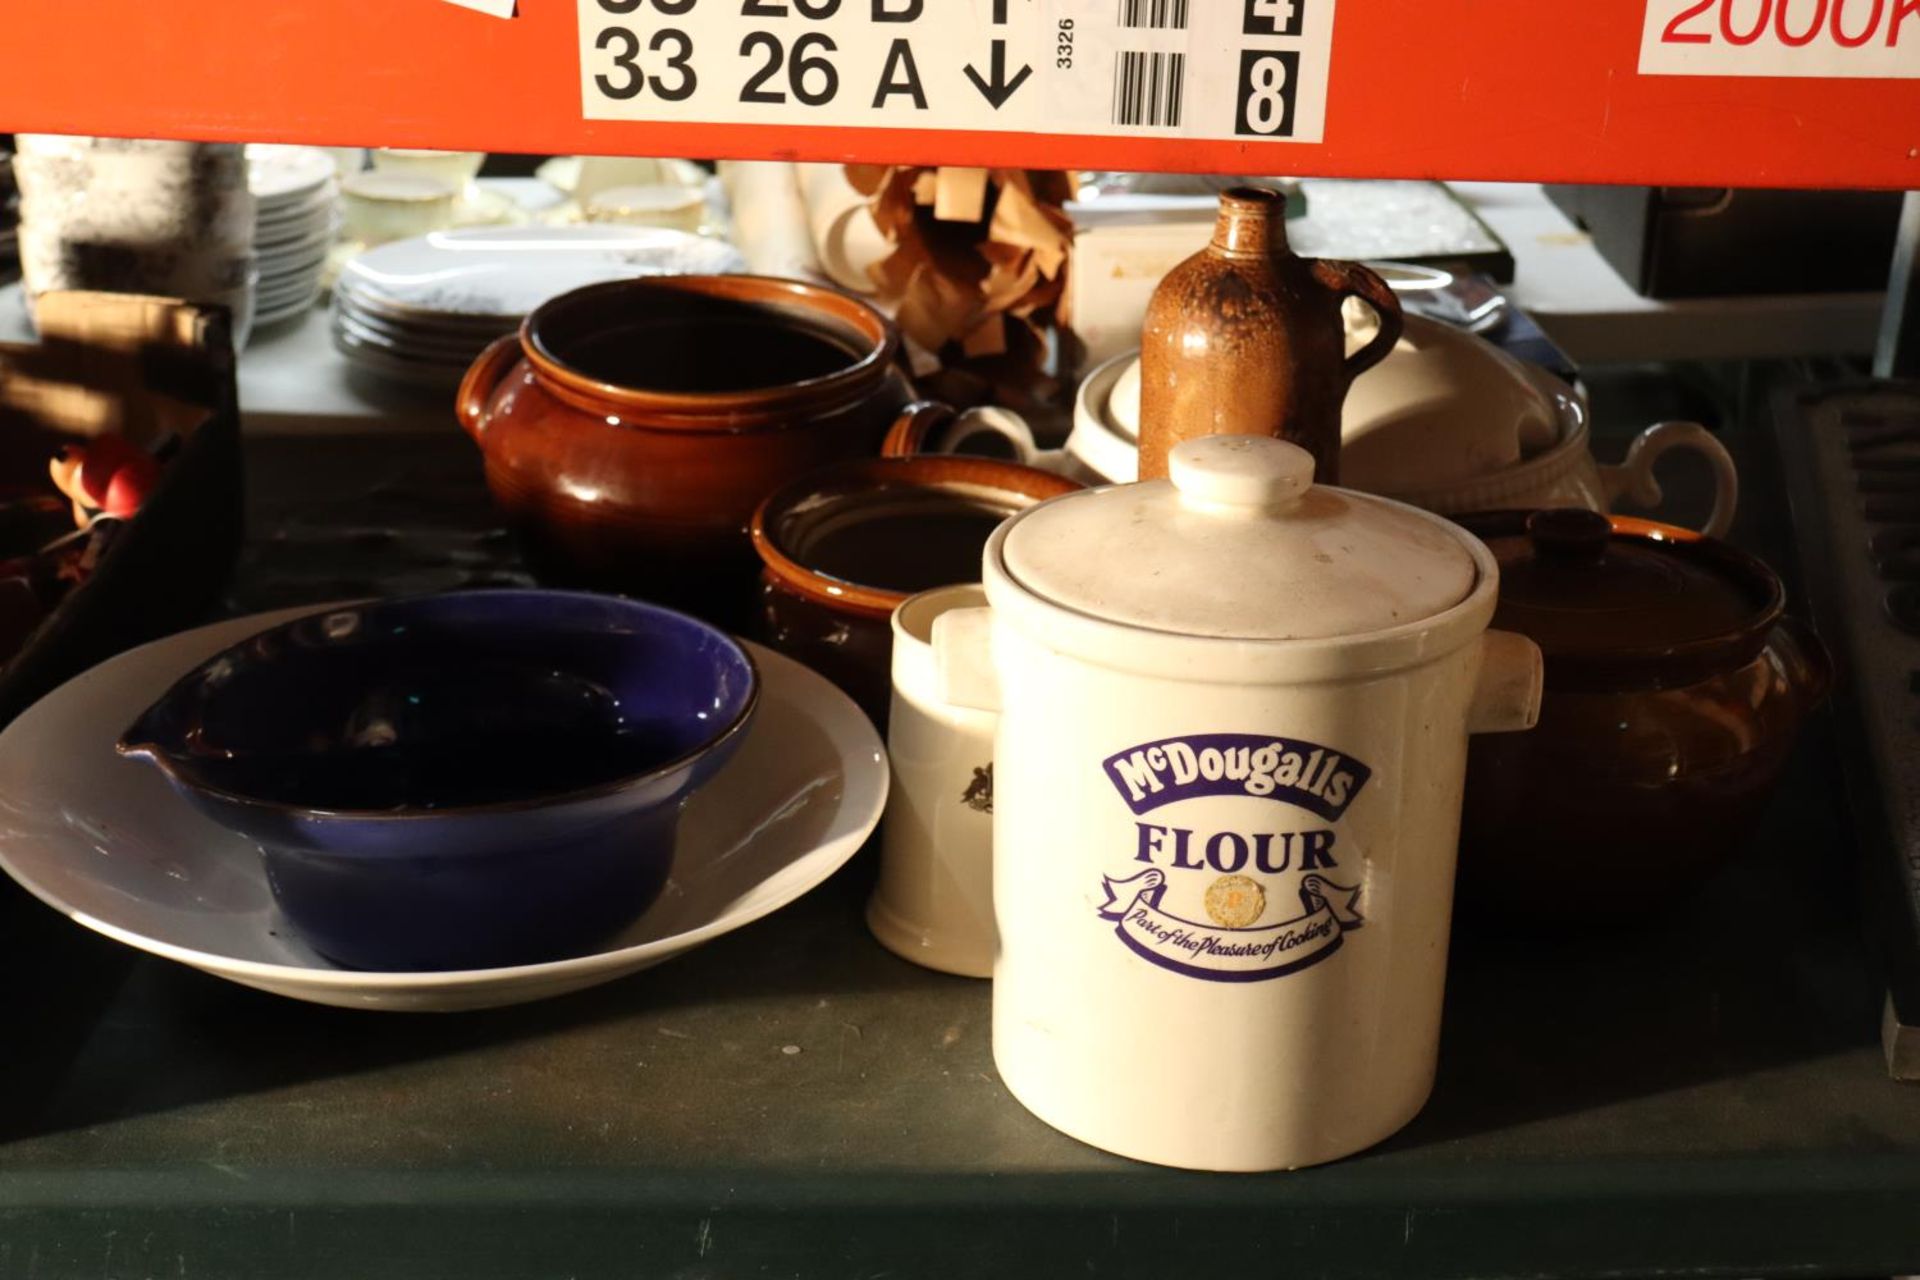 A QUANTITY OF CERAMIC ITEMS TO INCLUDE A McDOUGALLS FLOUR CONTAINER, A LARGE LIDDED SERVING